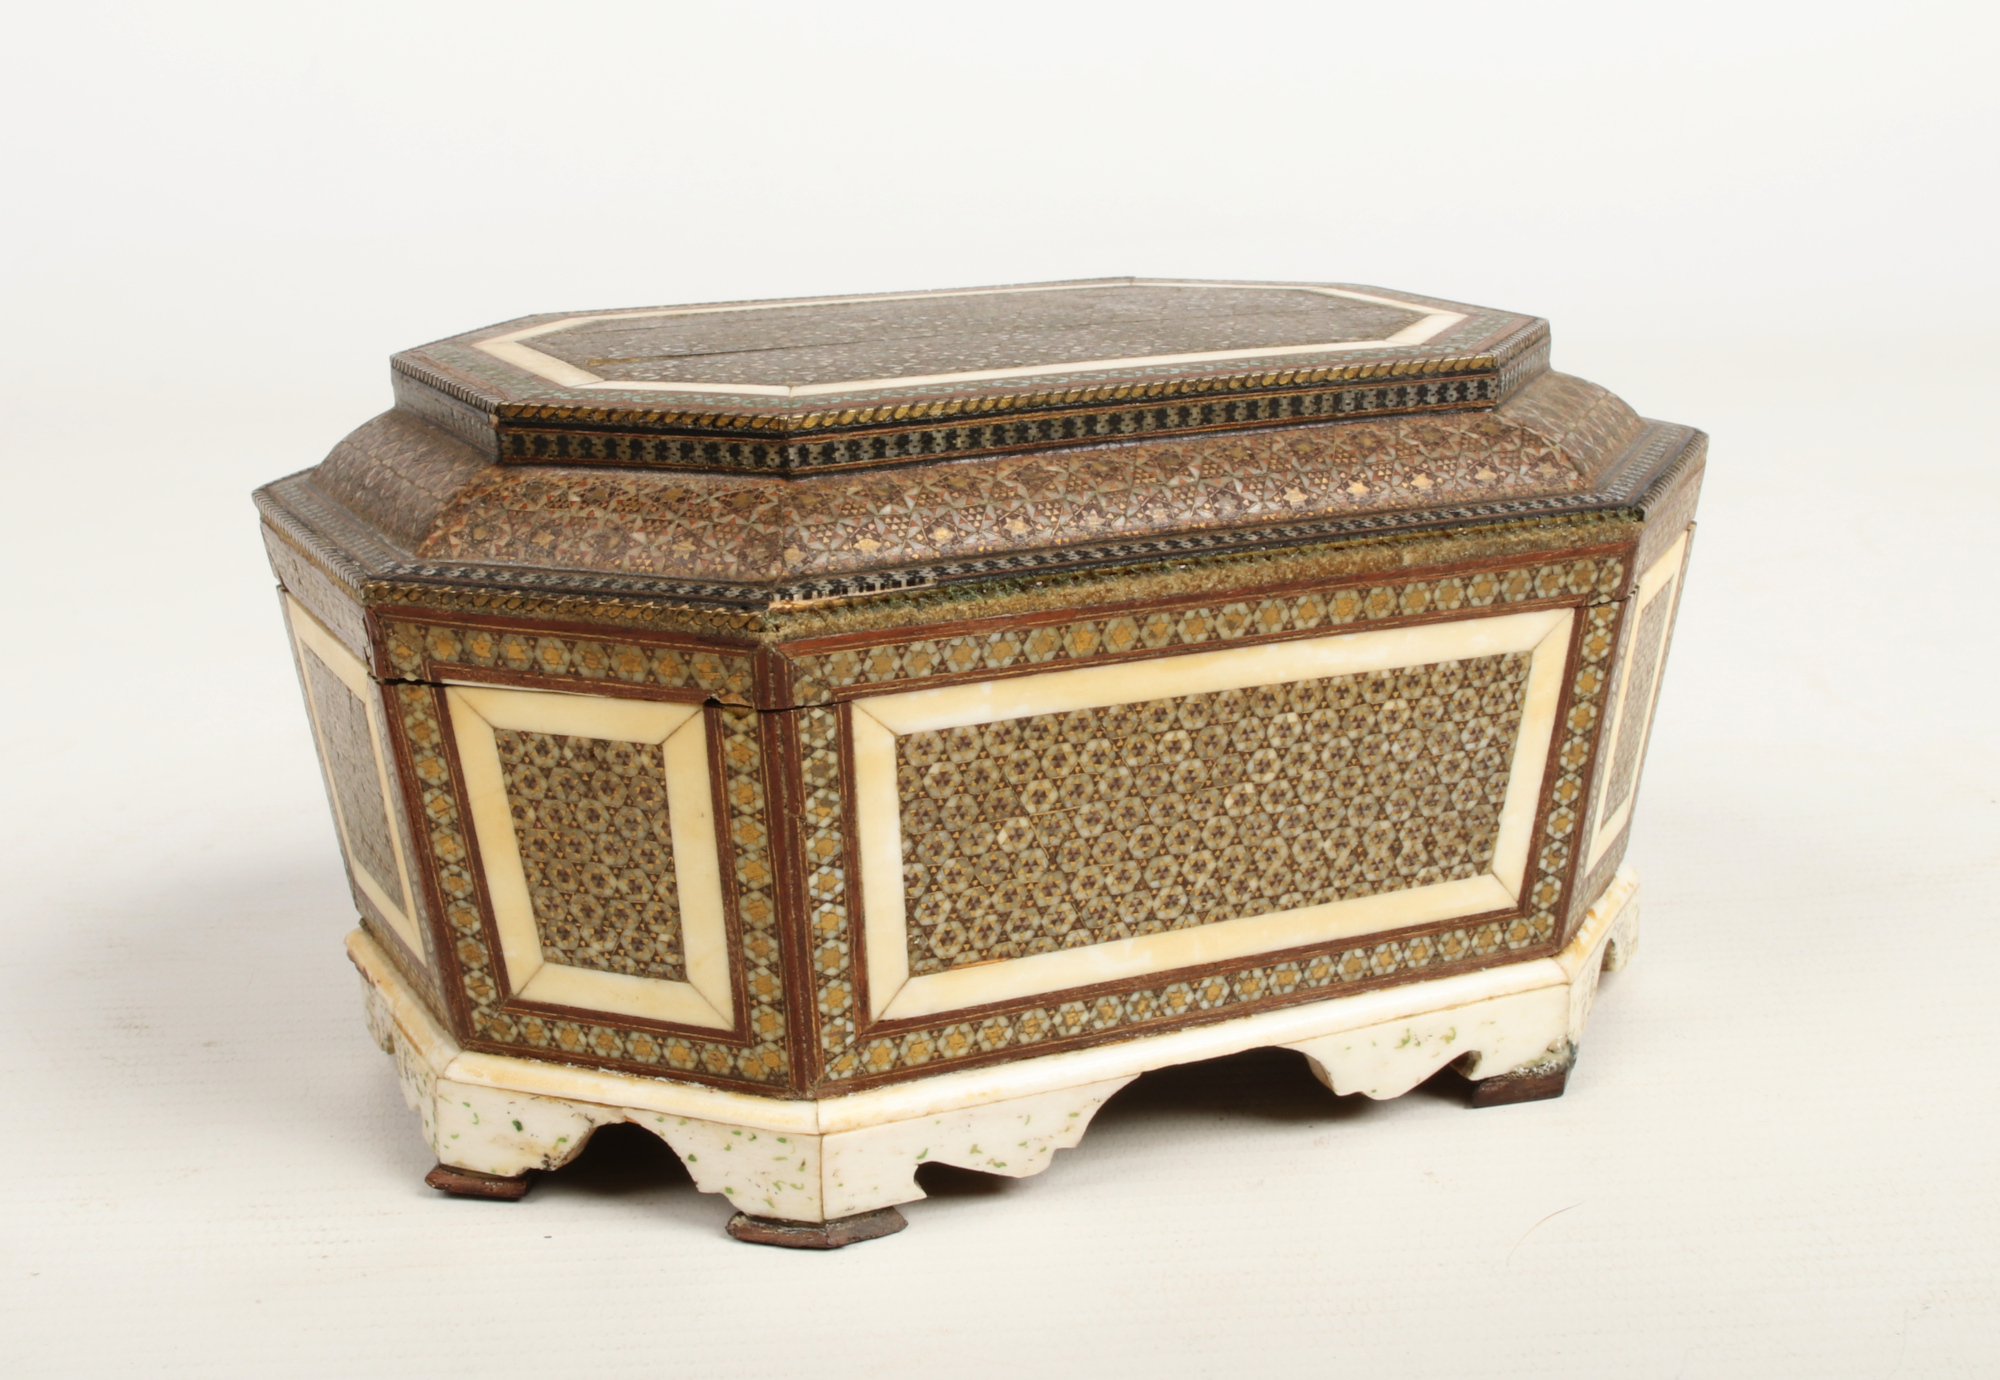 A 19th century Persian wood, brass and ivory micro mosaic casket of canted rectangular form and